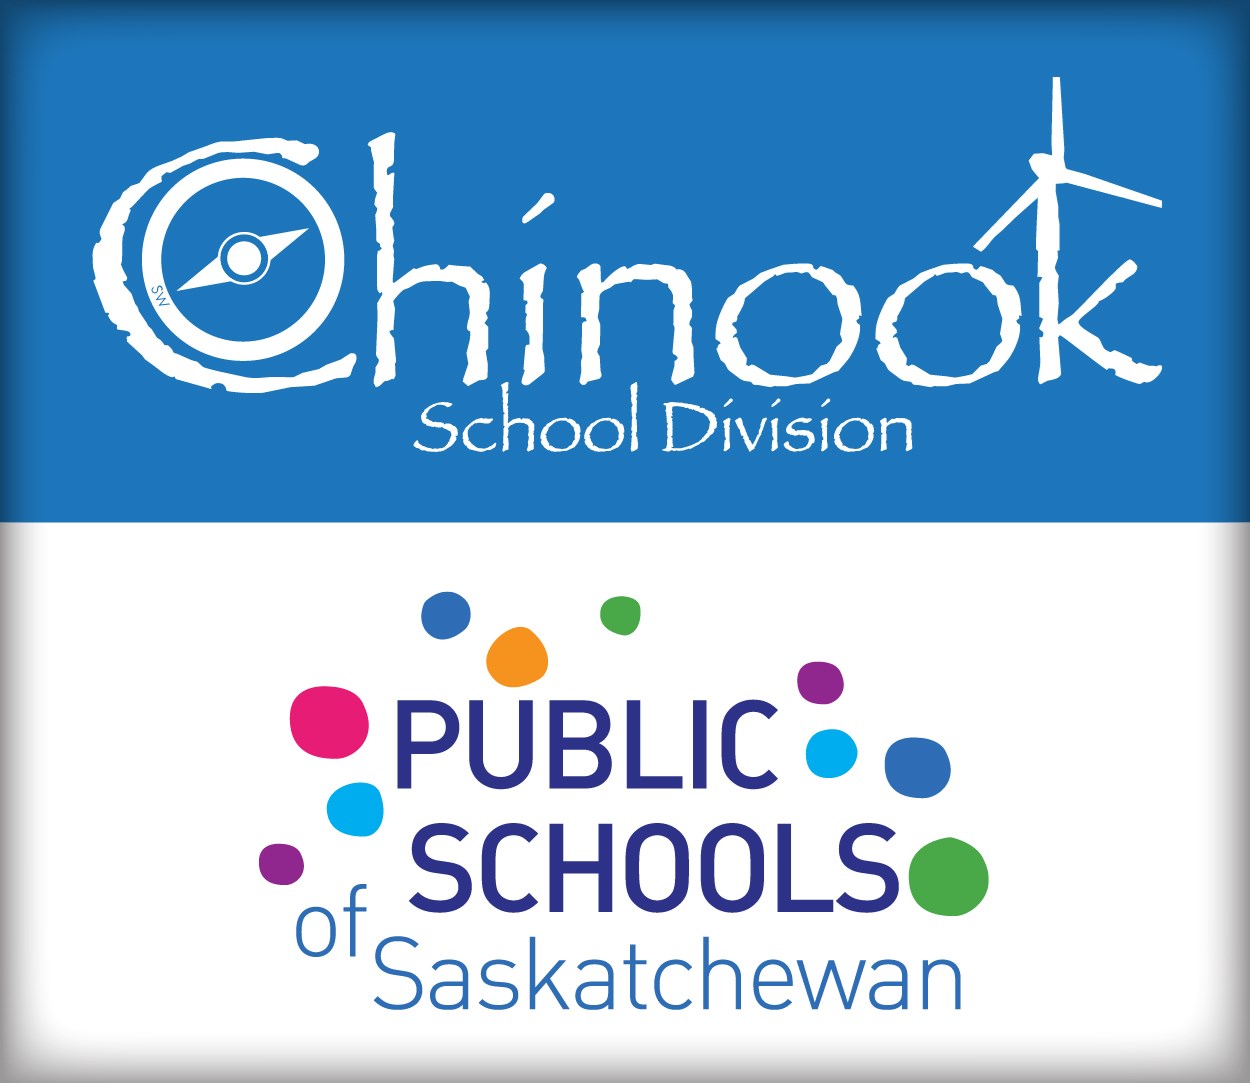 Chinook School Division